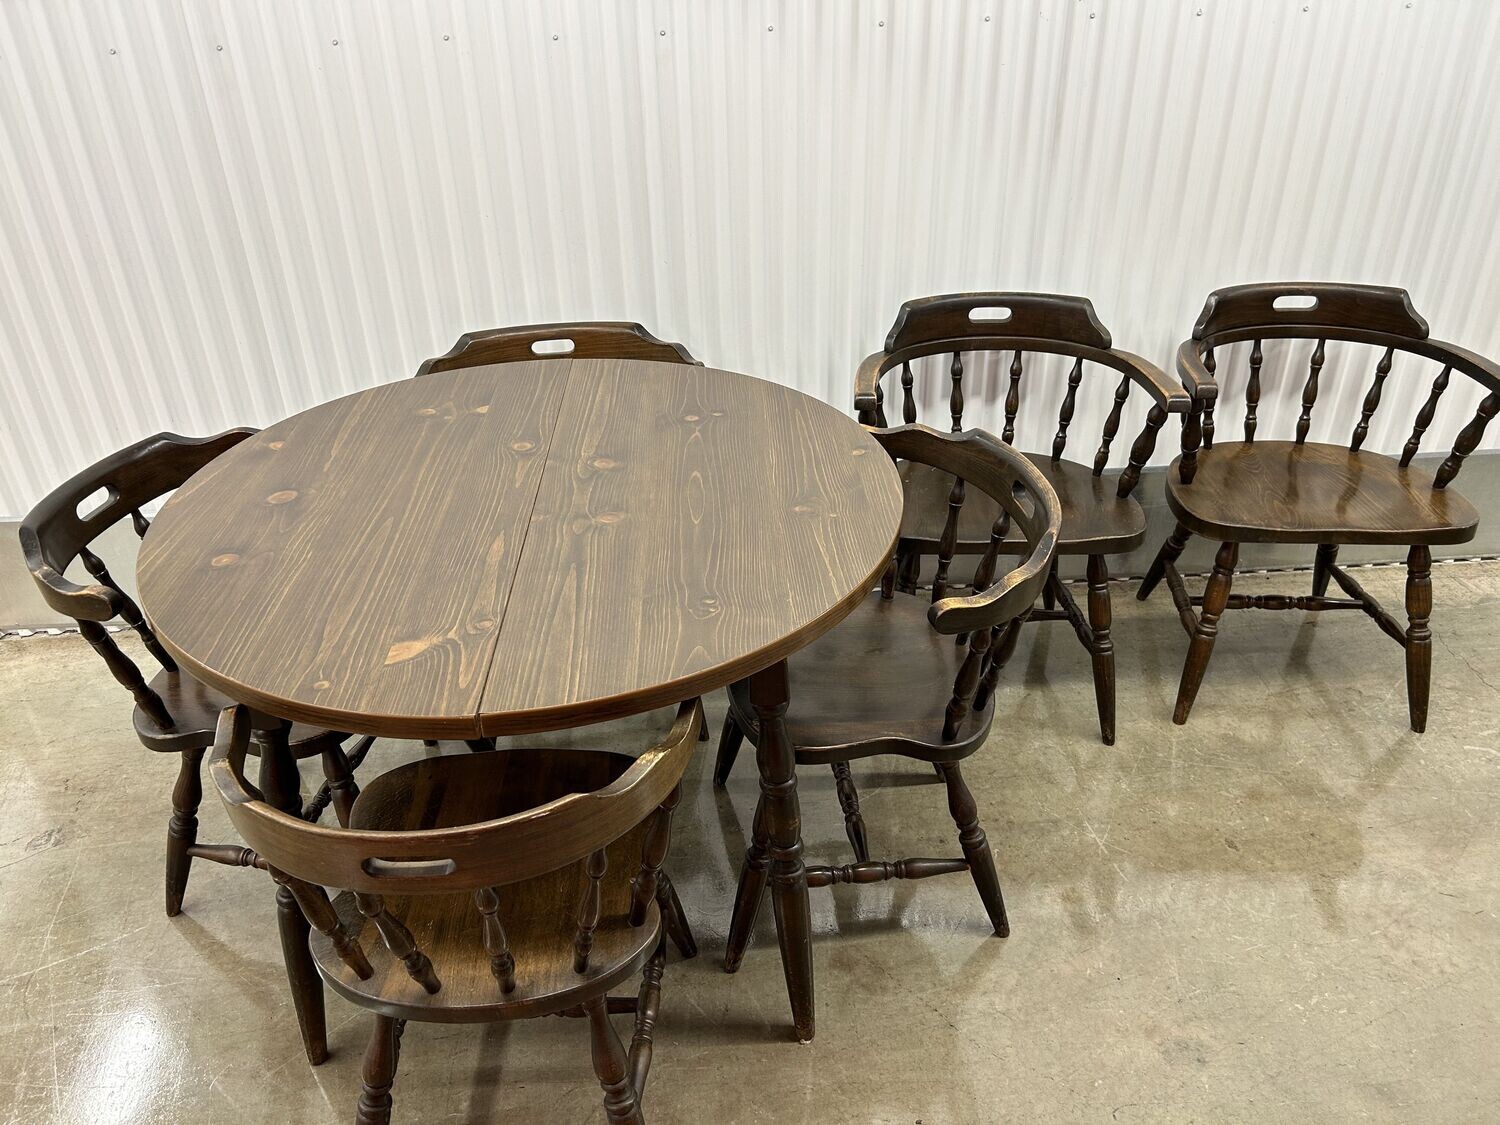 Dark Pine Kitchen Table, 6 chairs, extends #1046 ** 3 wks. to sell, full price